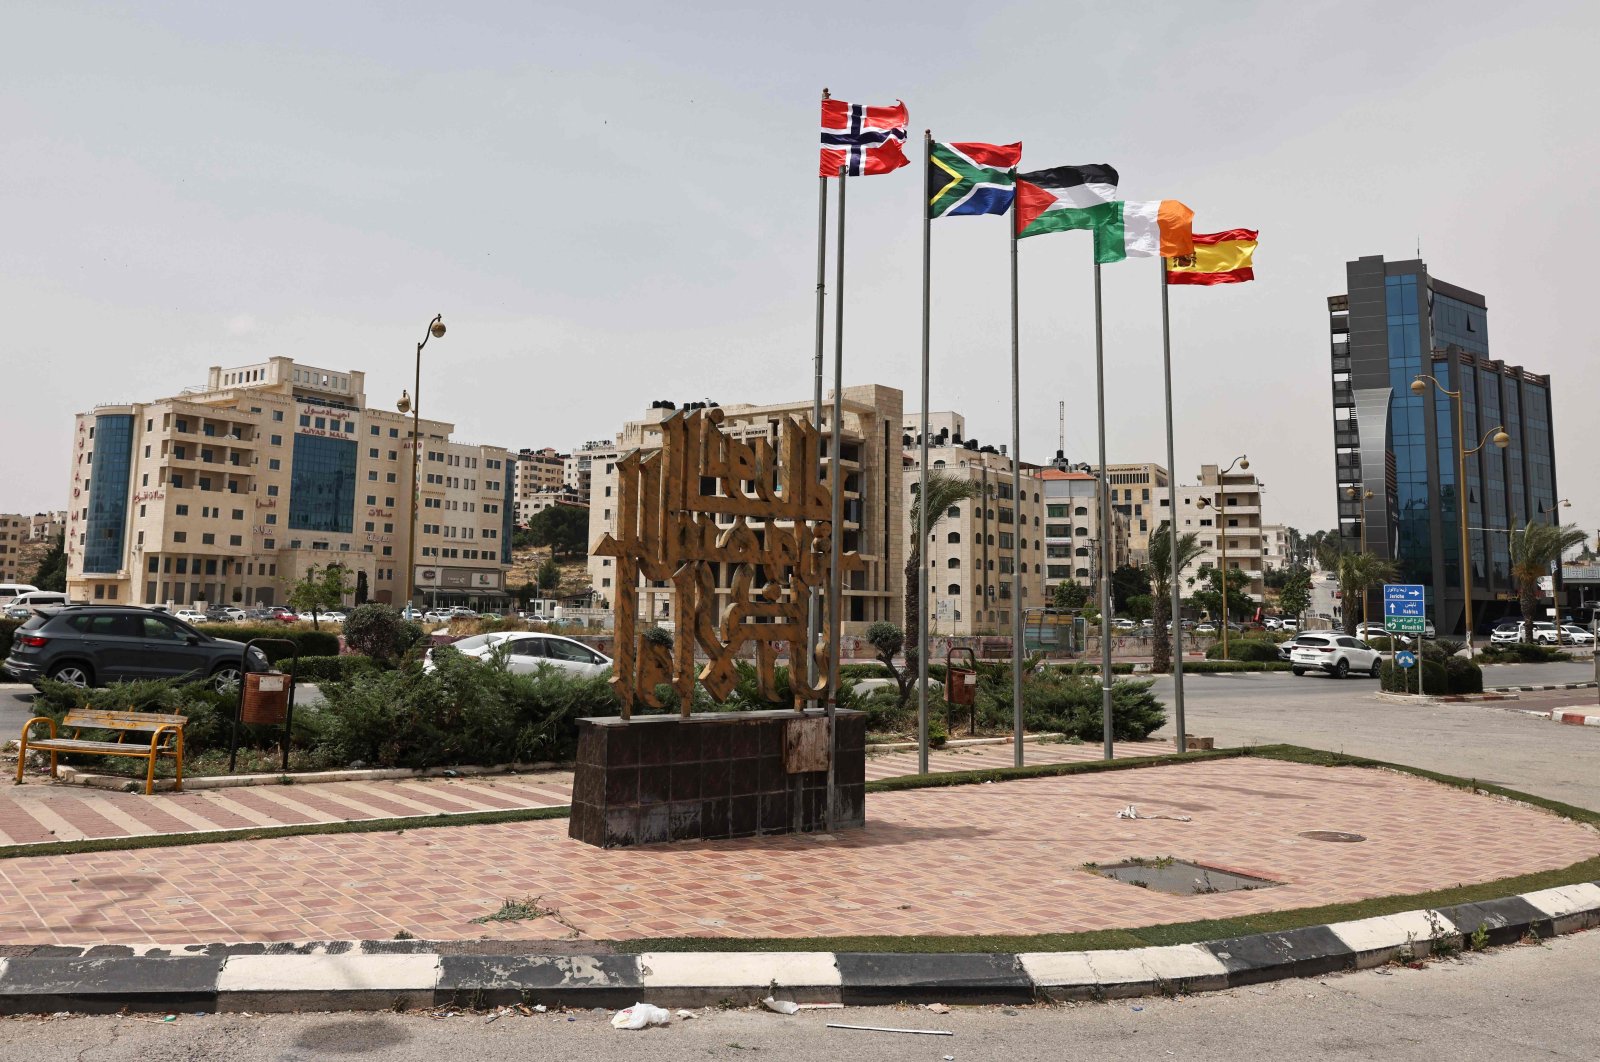 (L-R) The flags of Norway, South Africa, Palestine, Ireland, and Spain, are raised at an entrance of Ramallah city in the occupied West Bank, Palestine, May 28, 2024. (AFP Photo)